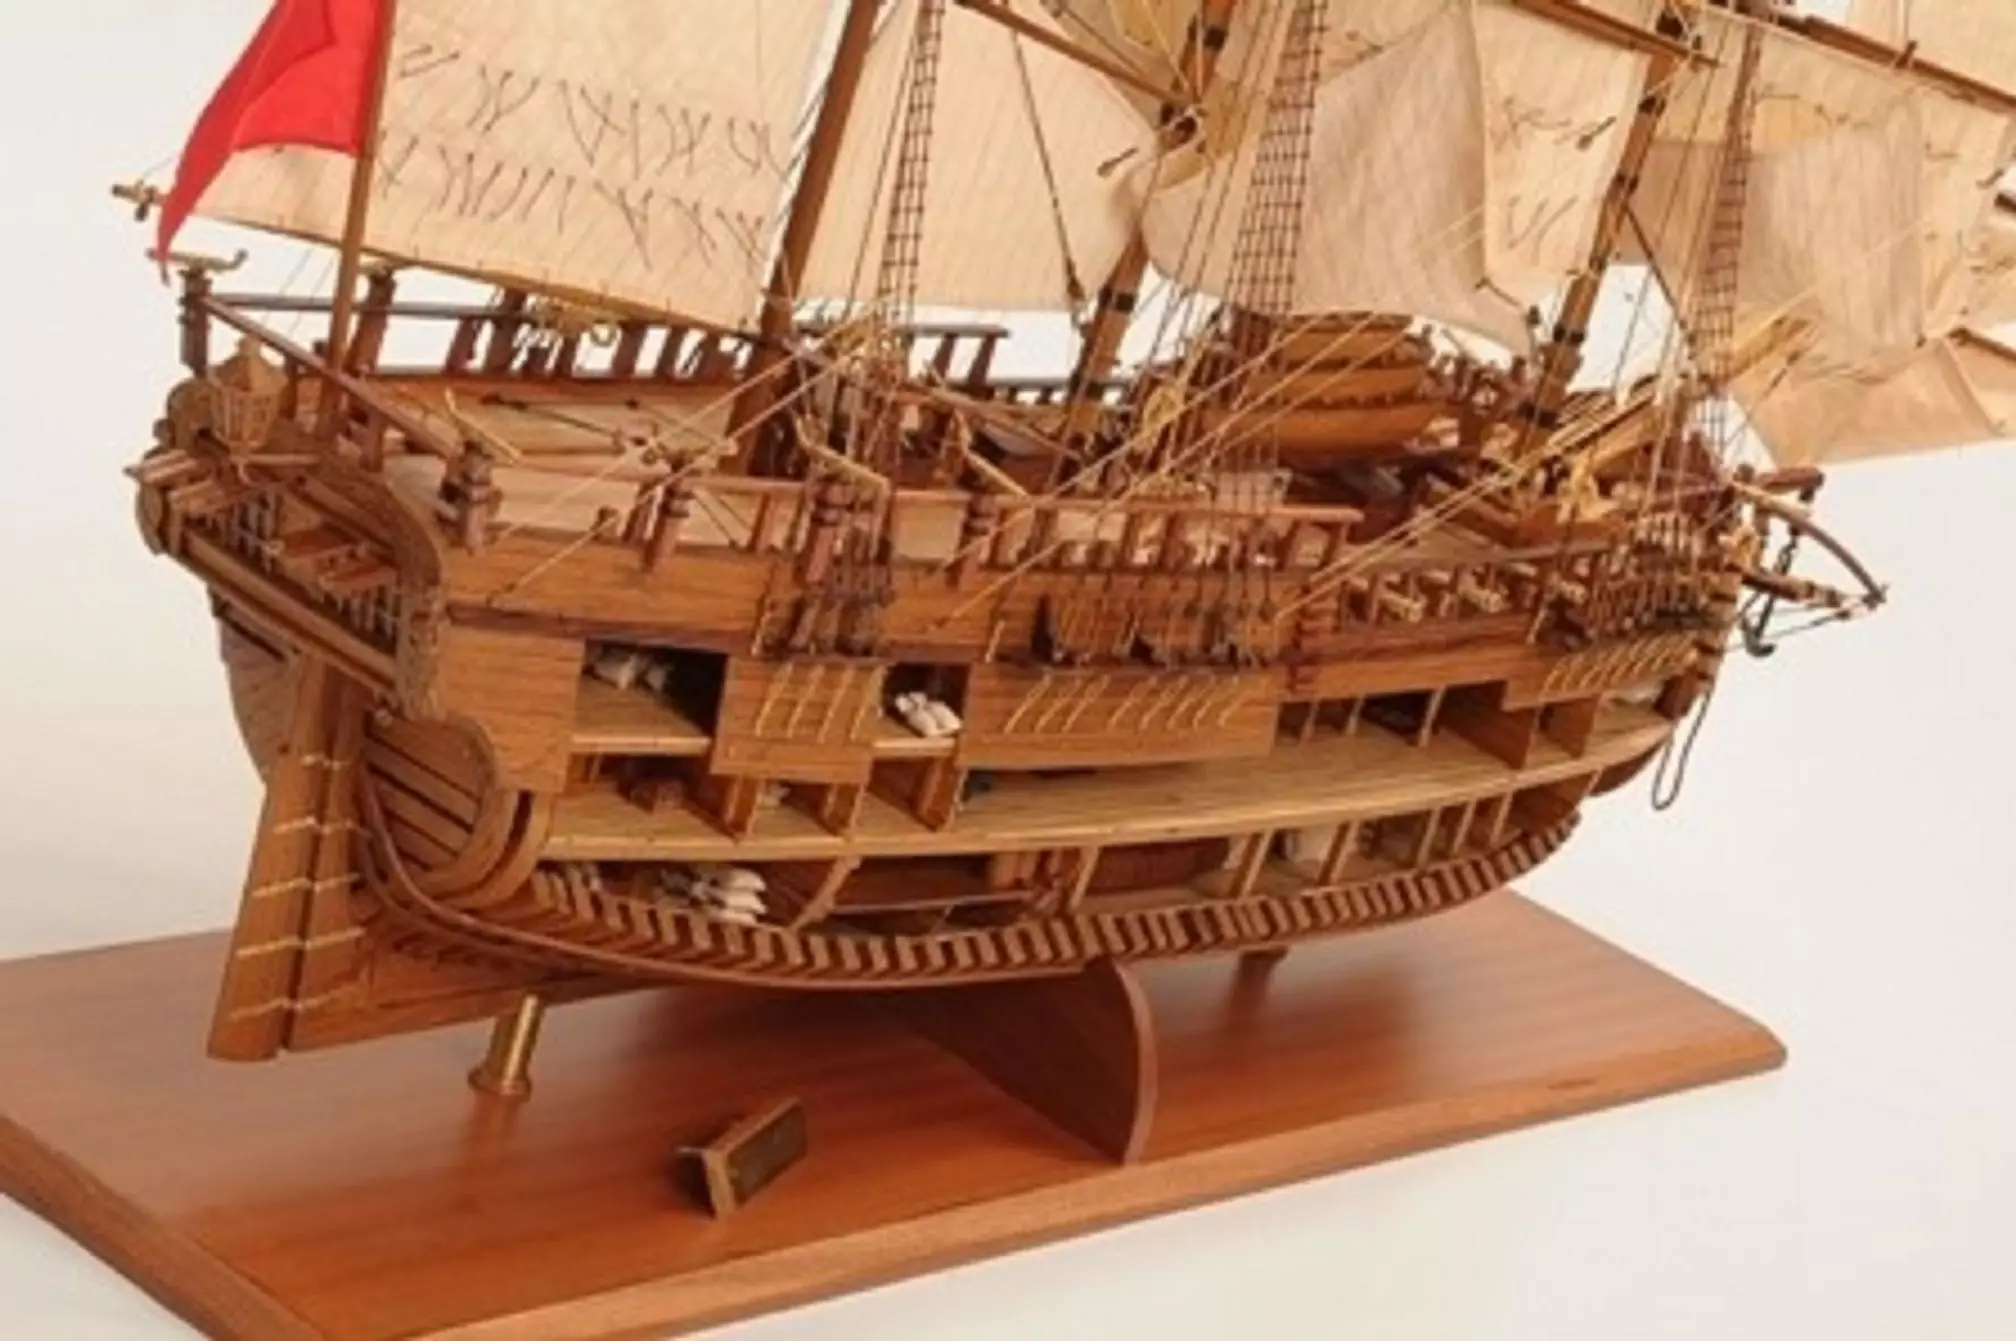 Hms Endeavour Open Hull Model Ship Handcrafted Wooden Ready Made